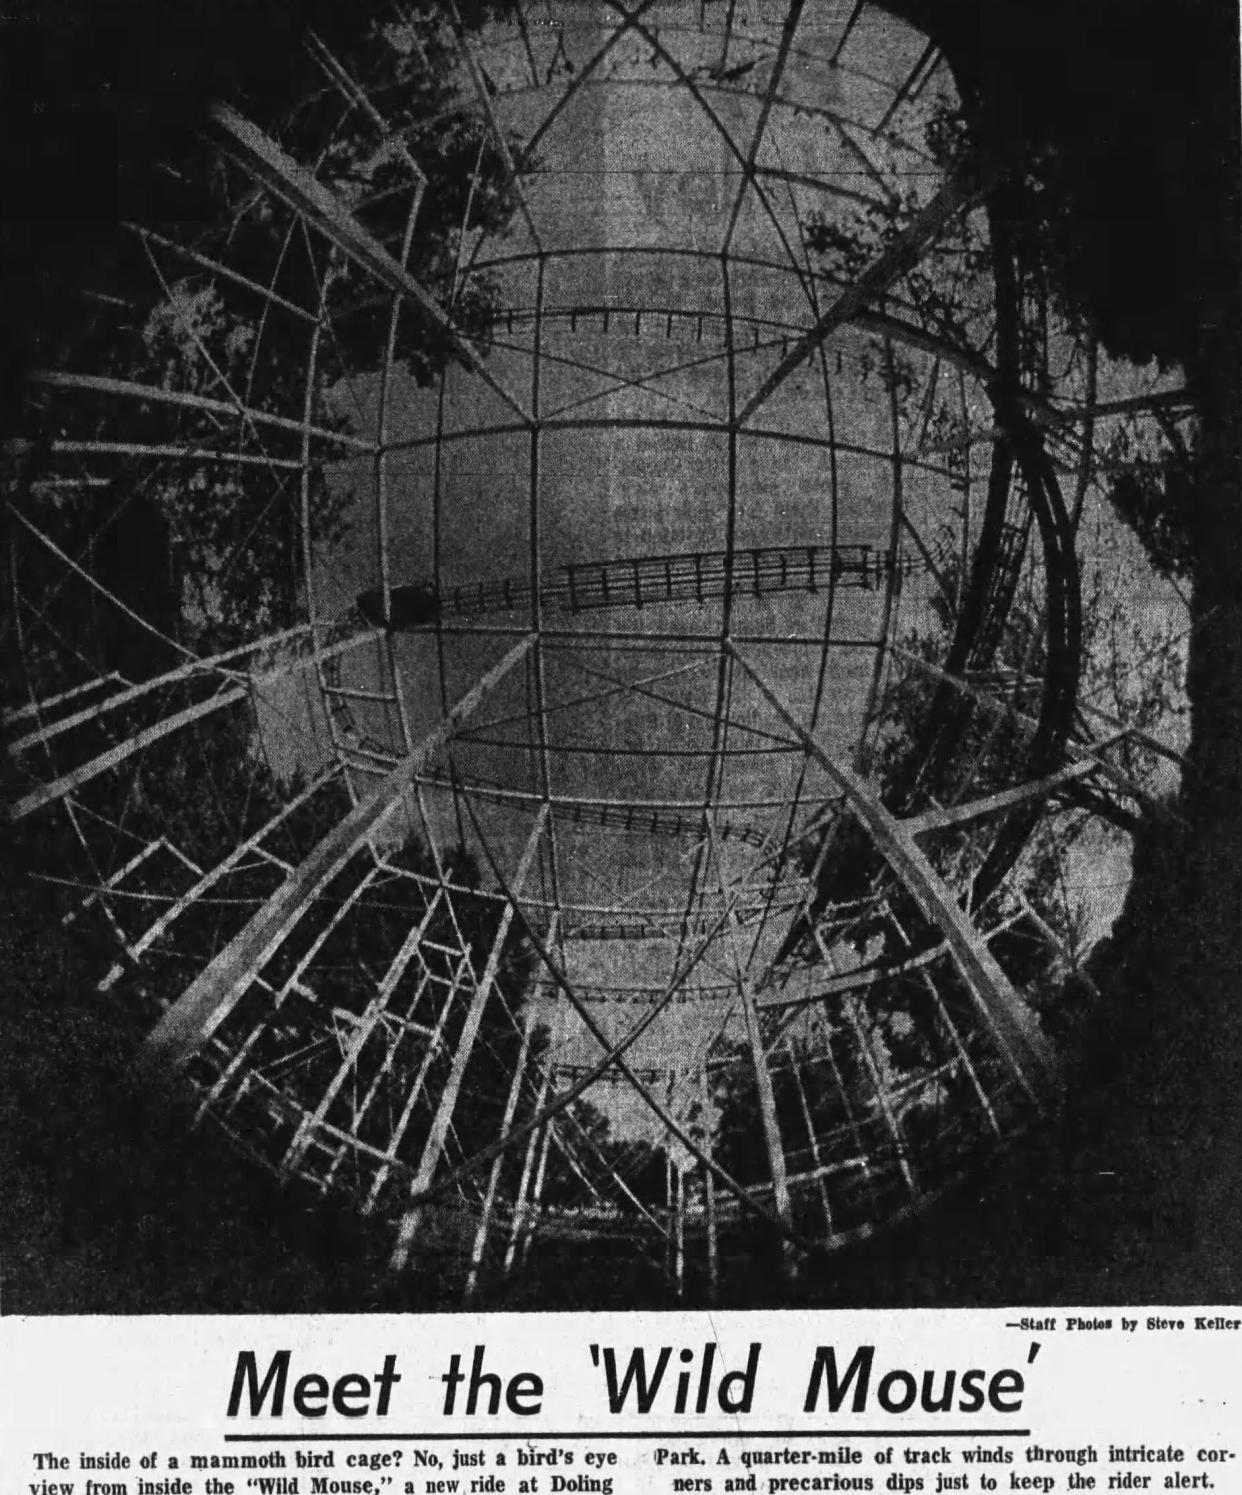 A newspaper clipping about the opening of the new Wild Mouse rollercoaster at the now-defunct Doling Amusement Park, printed in the Springfield News-Leader on July 4, 1969.